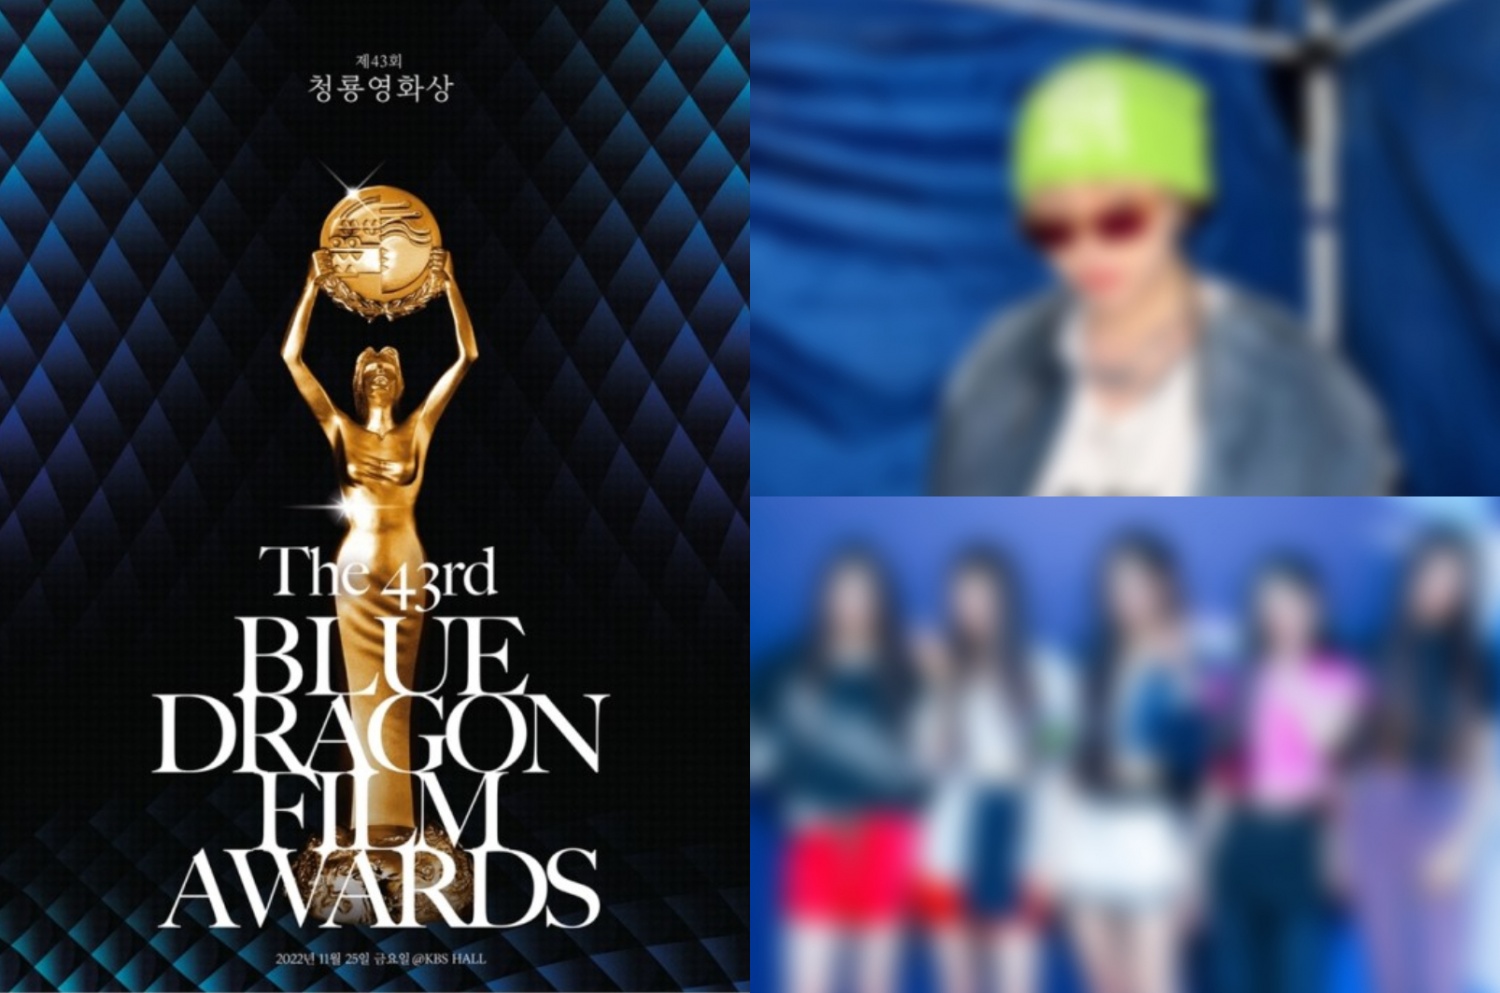 The performers of the Blue Dragon Film Awards 2022 have been revealed